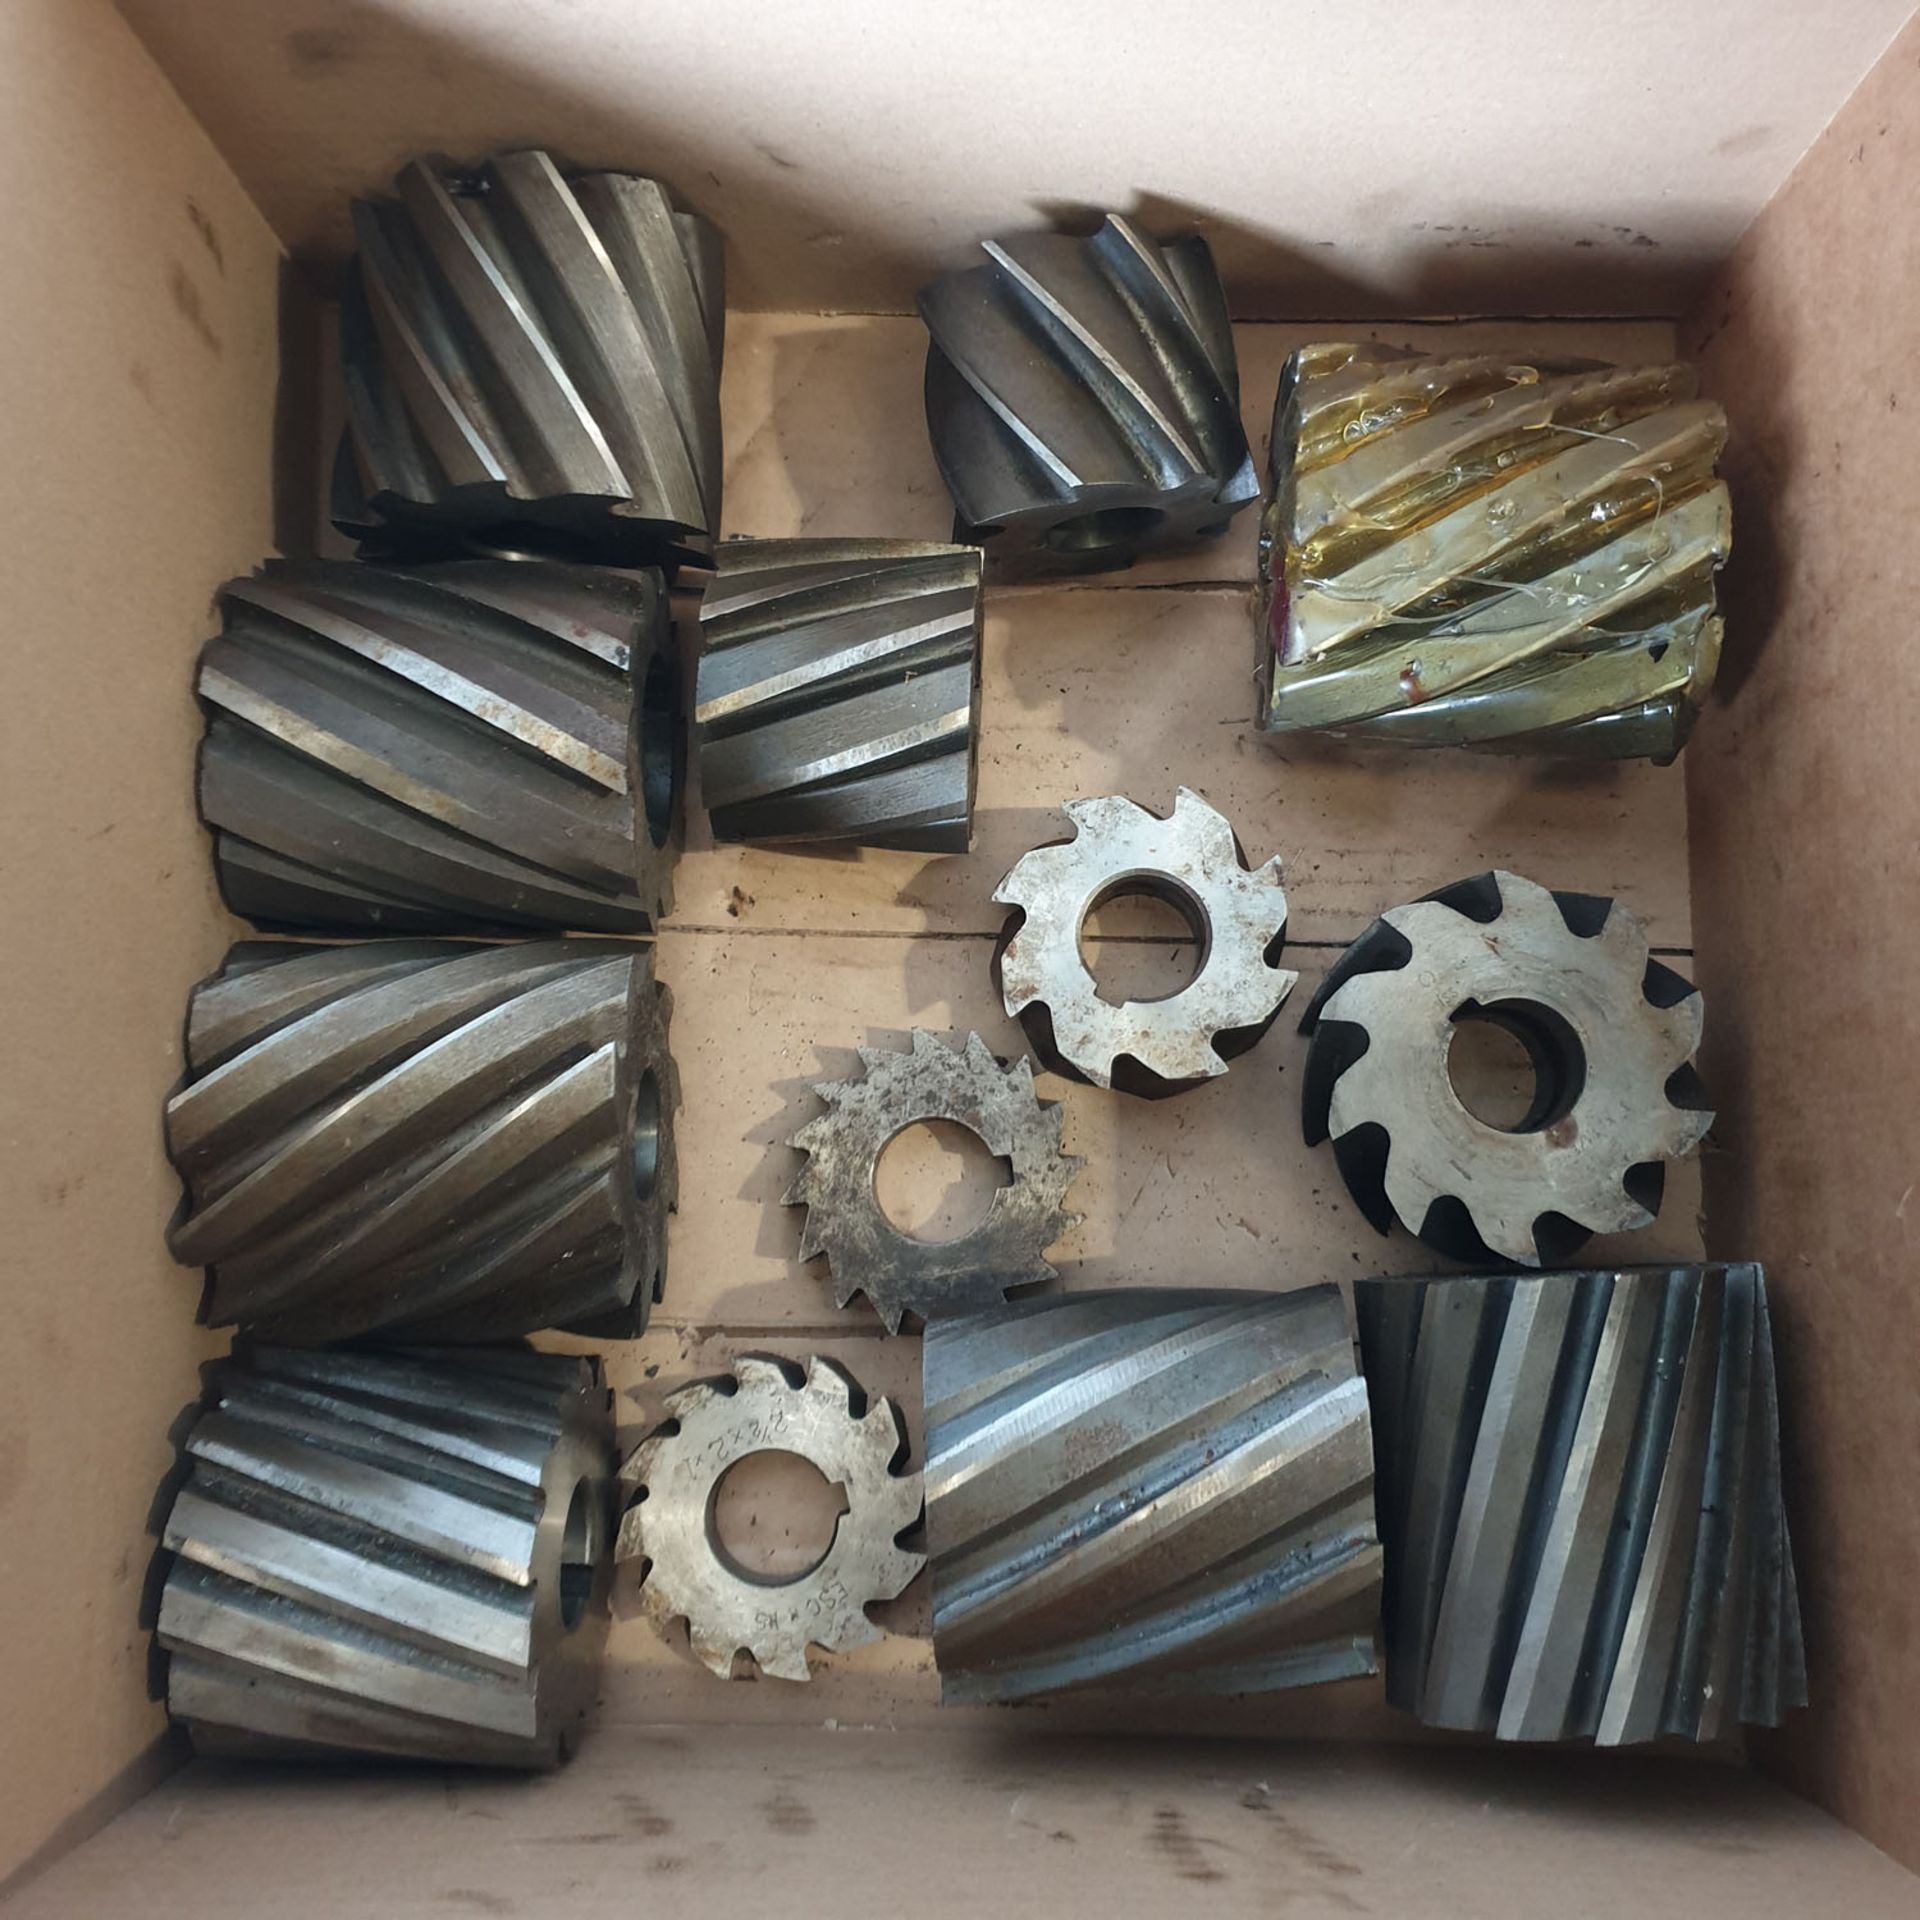 Quantity of Horizontal Spindle Milling Cutters.